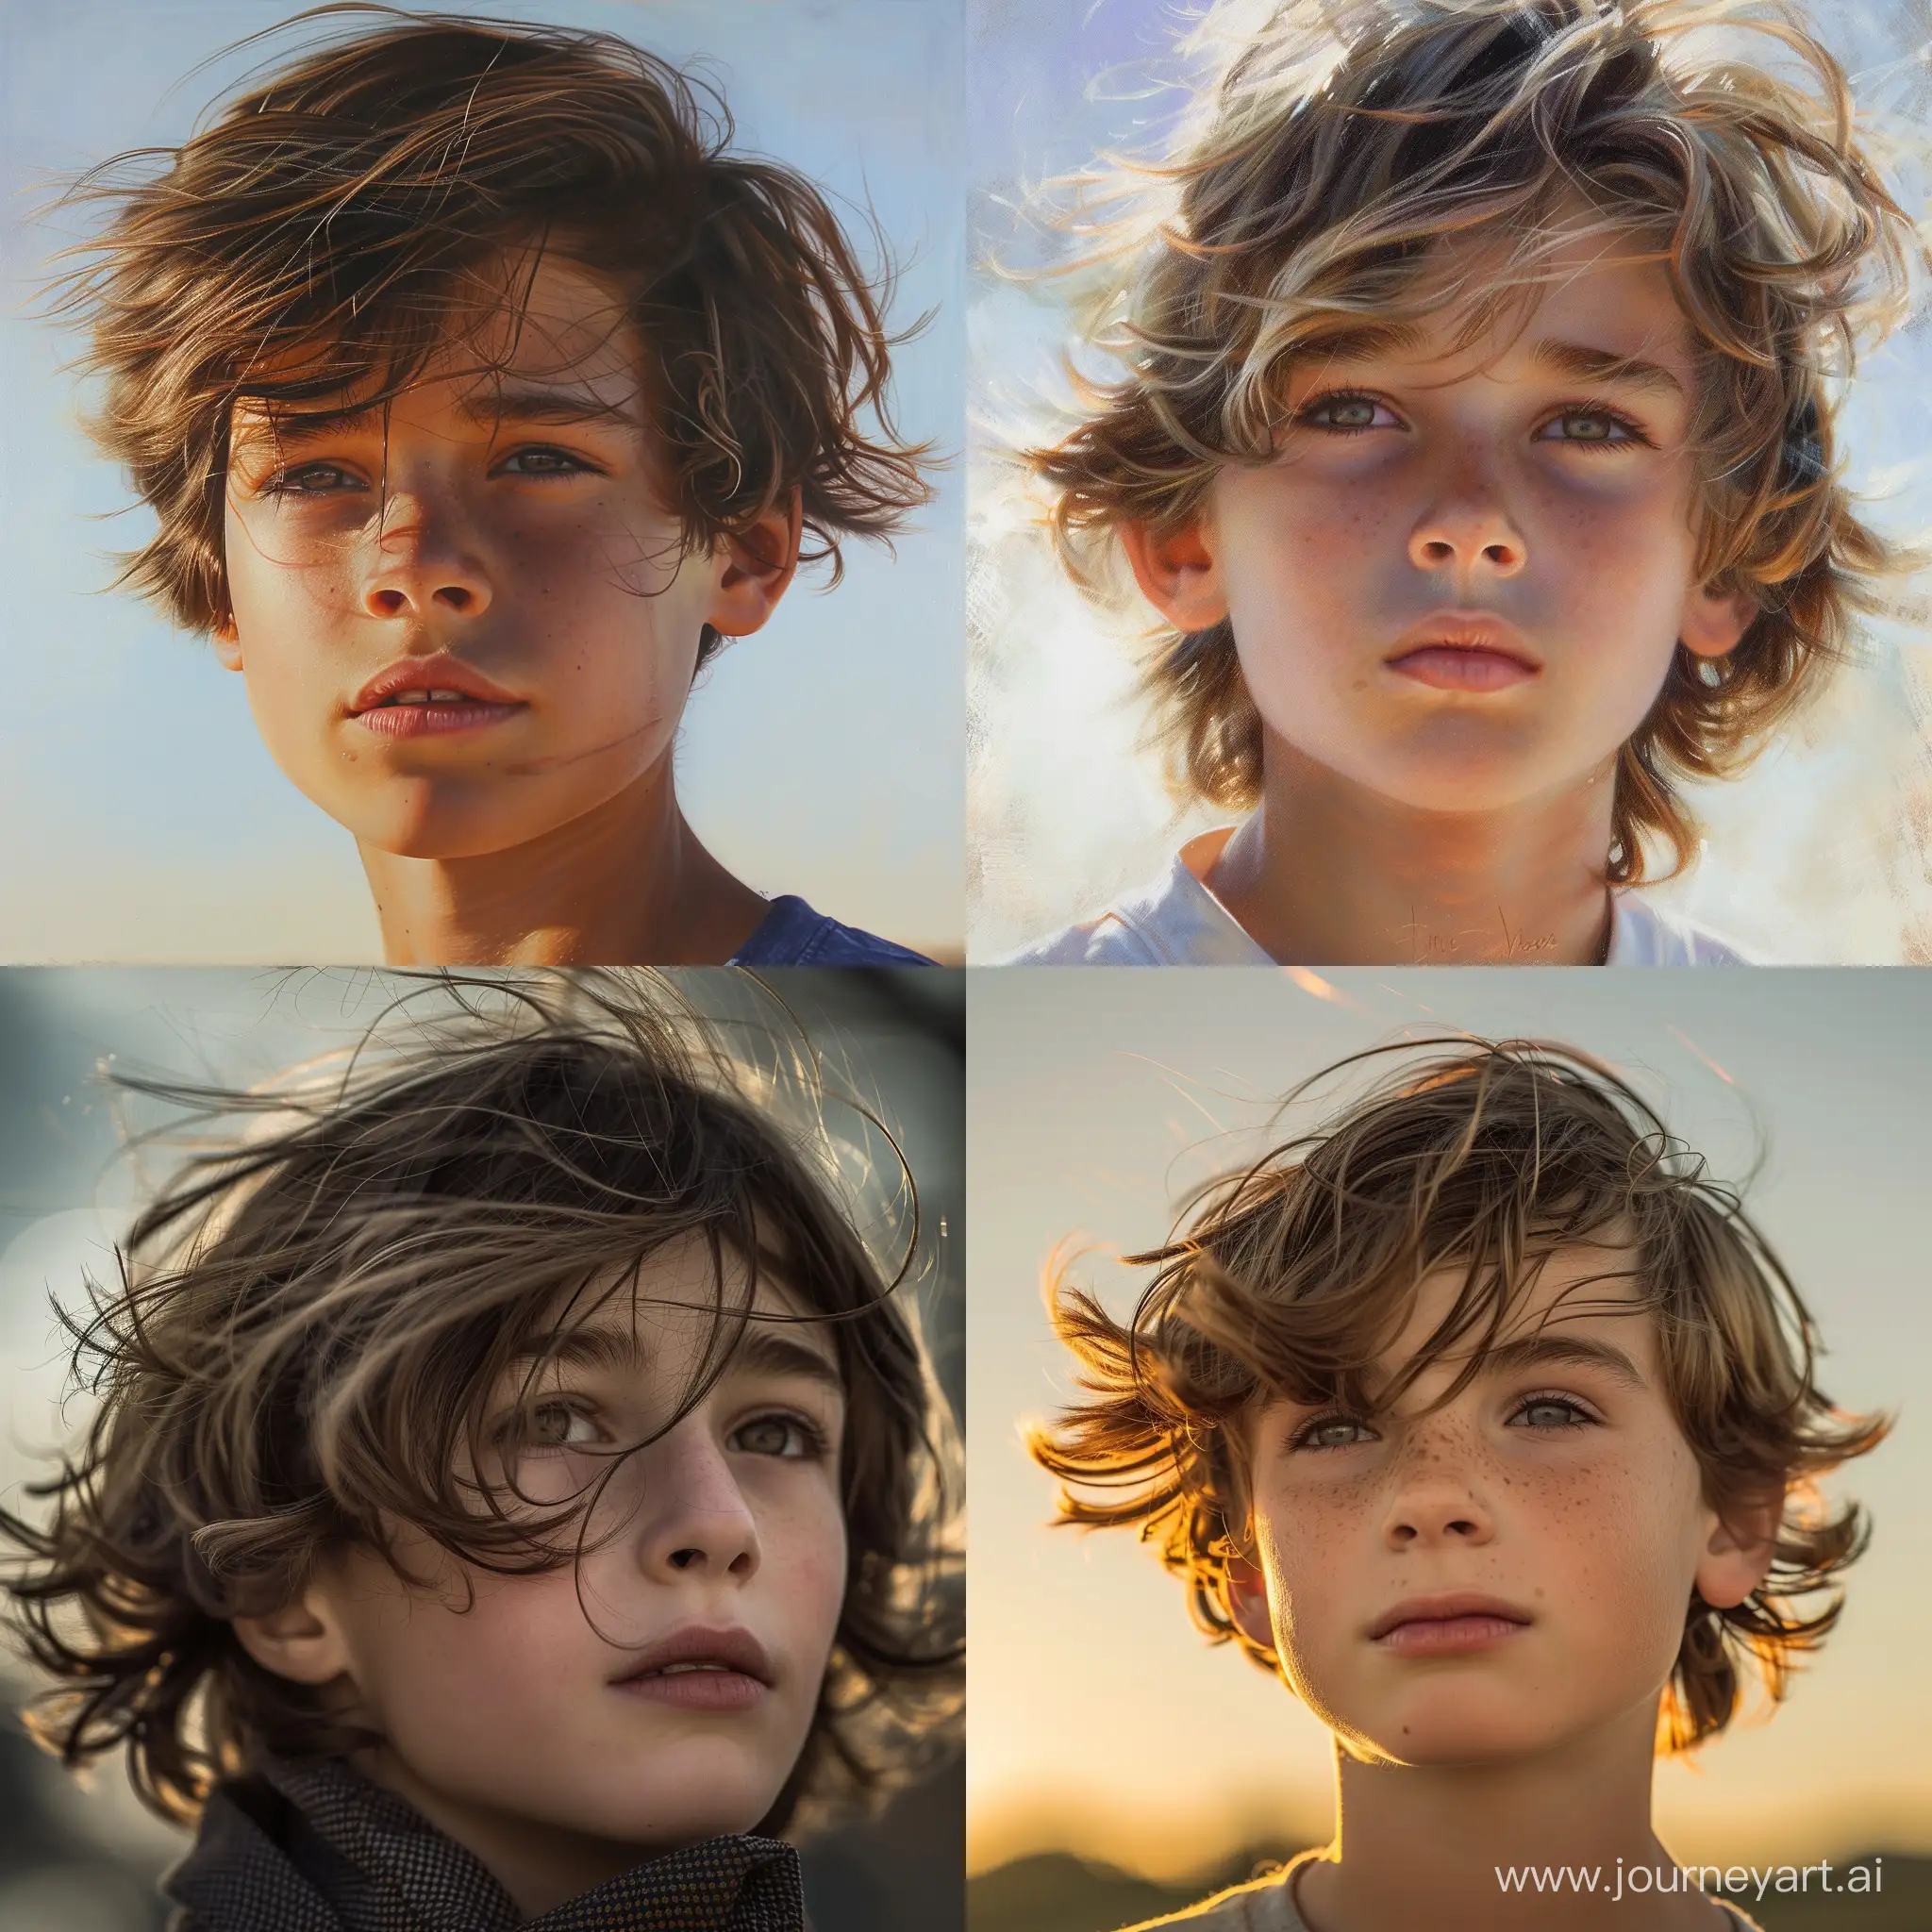 Portrait-of-a-Thoughtful-12YearOld-Boy-Embracing-the-Breeze